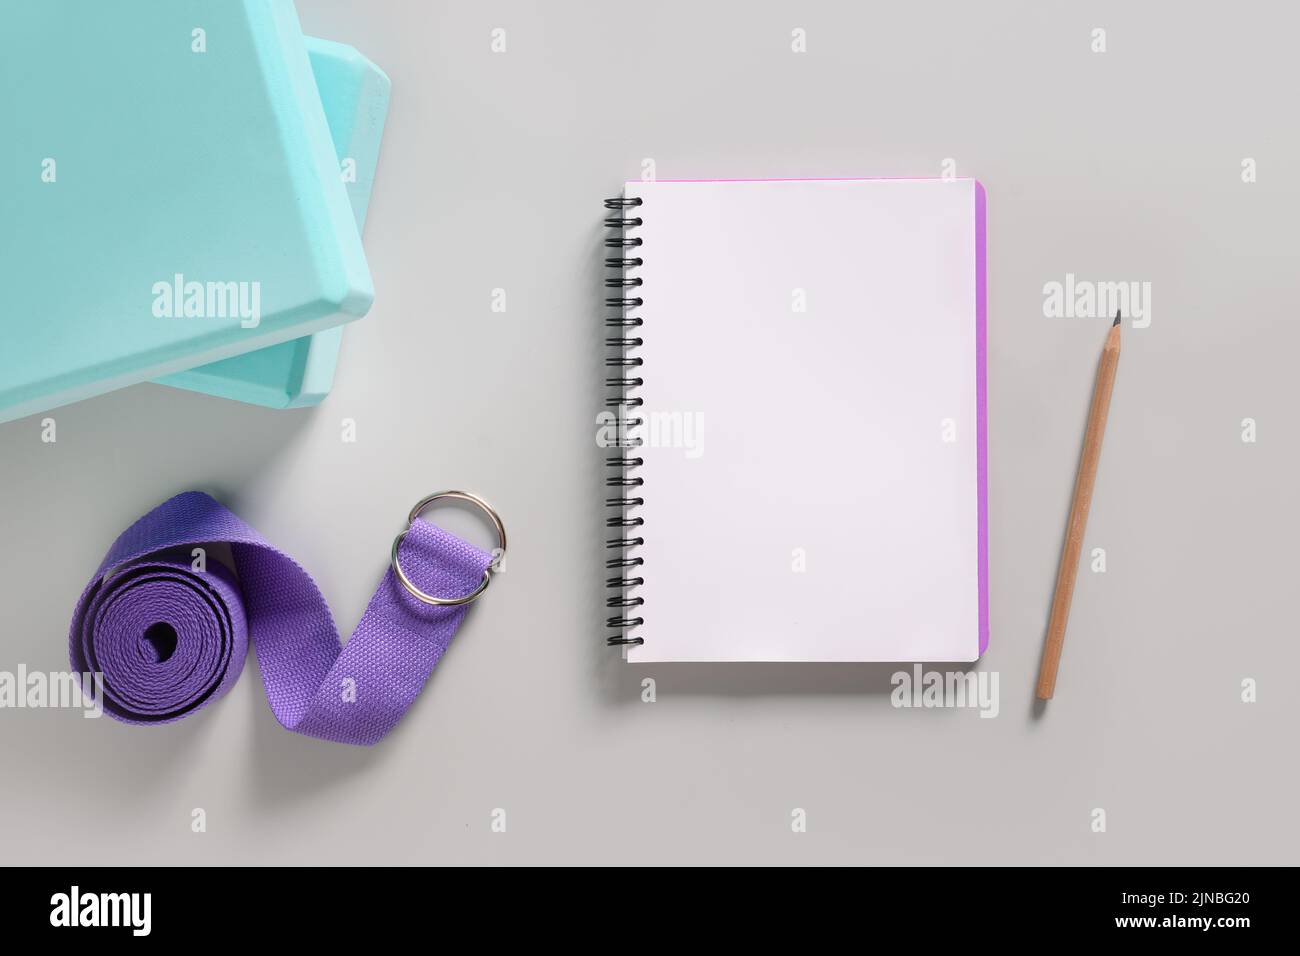 Green yoga blocks, violet belt and notebook on gray background. Training plan. Workouts plan. Stock Photo